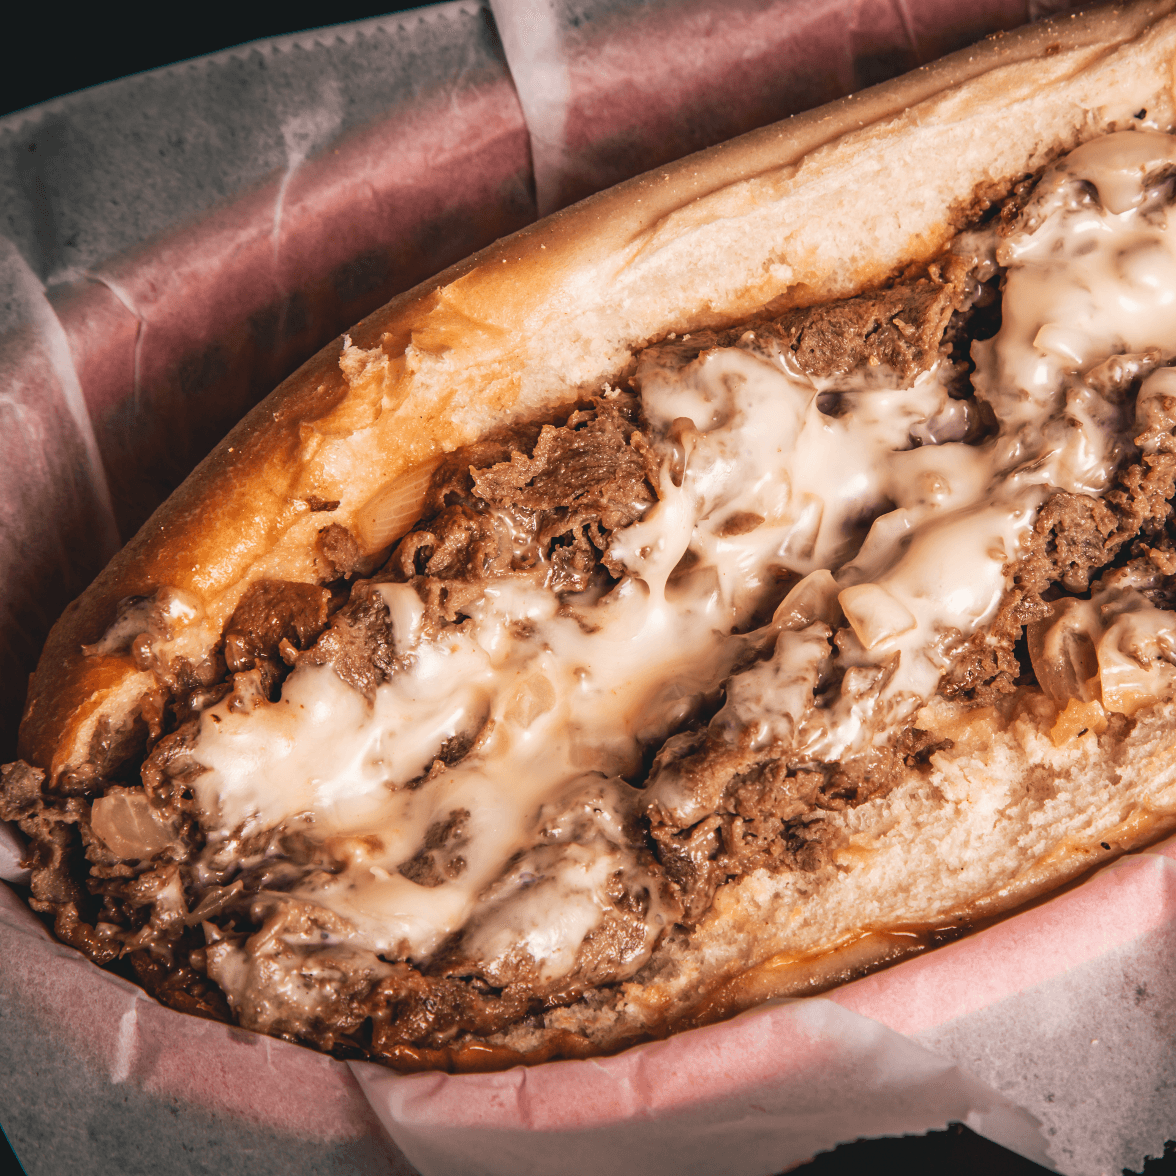 Best Cheesesteaks in South Florida